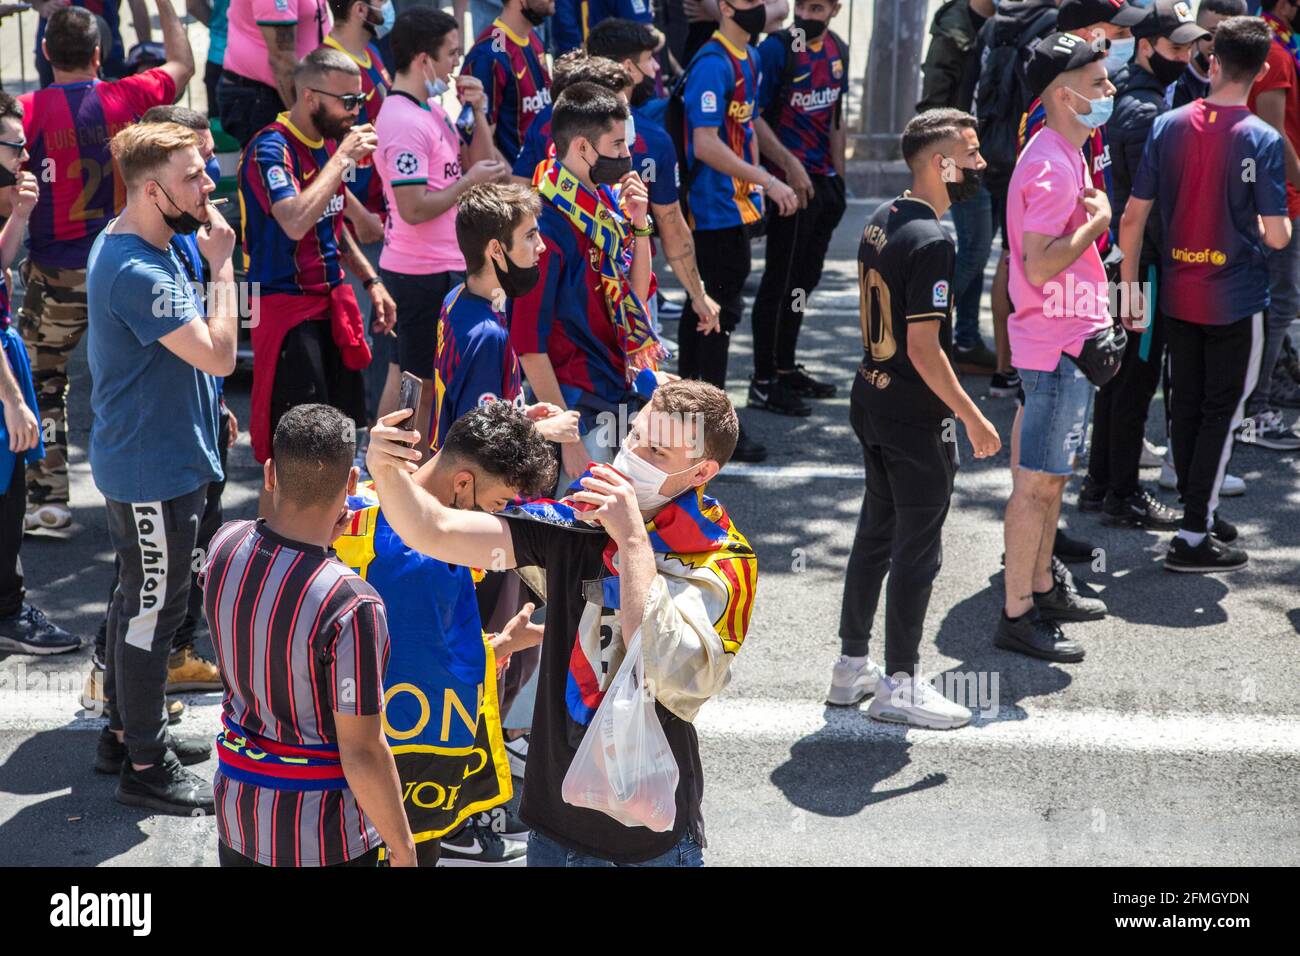 Barcelona, Catalonia, Spain. 8th May, 2021. Futbol Club Barcelona fan is seen taking a selfie.The ultras supporter group of Futbol Club Barcelona, Boixos Nois (Crazy Boys) have gathered outside the Camp Nou stadium to motivate the team before the match against Club Atletico de Madrid for the 35th round of La Liga, the Spanish football league. Barça's victory will put the team, currently in third place, ahead of Atletico de Madrid, which occupies the first position. Credit: Thiago Prudencio/DAX/ZUMA Wire/Alamy Live News Stock Photo